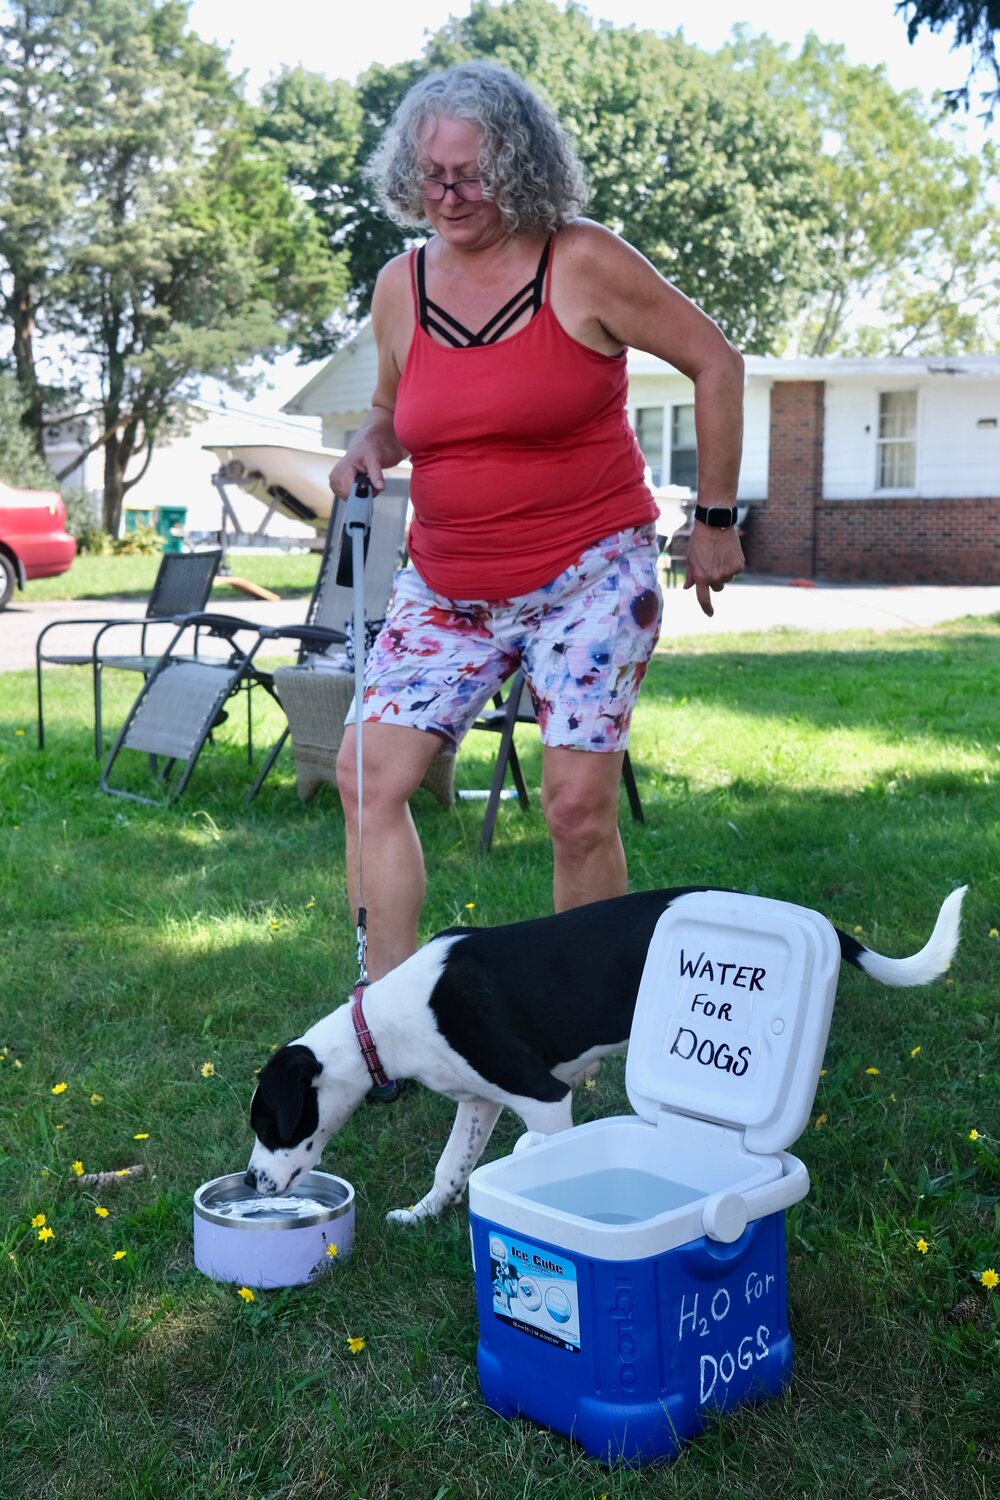 Norma Alix, with her 7-month-old mixed-breed, Willow, tends to the cooler that she filled with water for the thirsty dogs along Point Road.